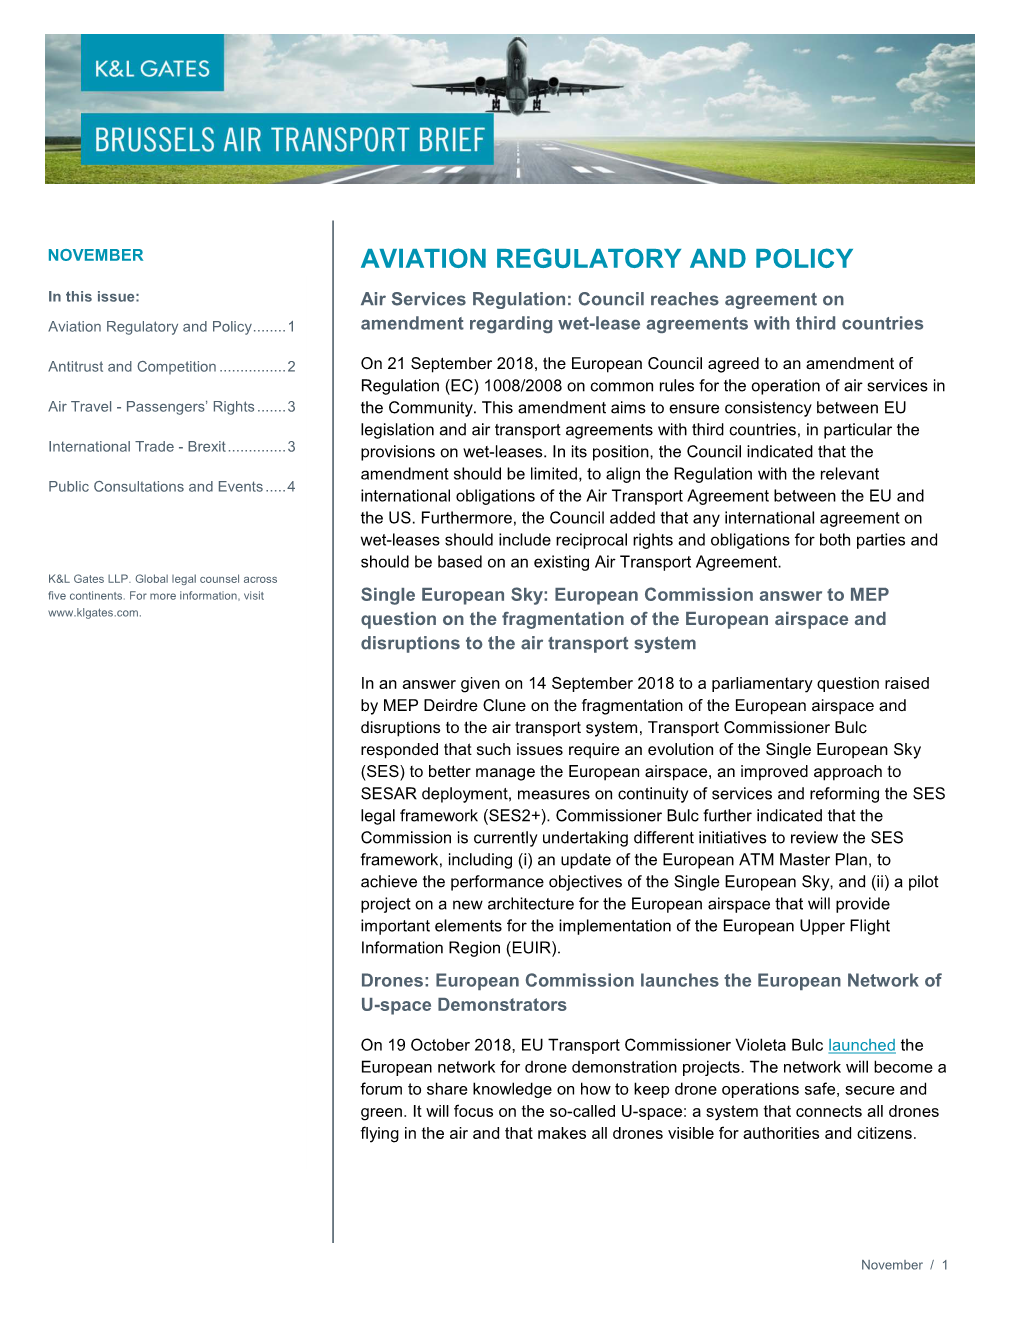 AVIATION REGULATORY and POLICY in This Issue: Air Services Regulation: Council Reaches Agreement on Aviation Regulatory and Policy